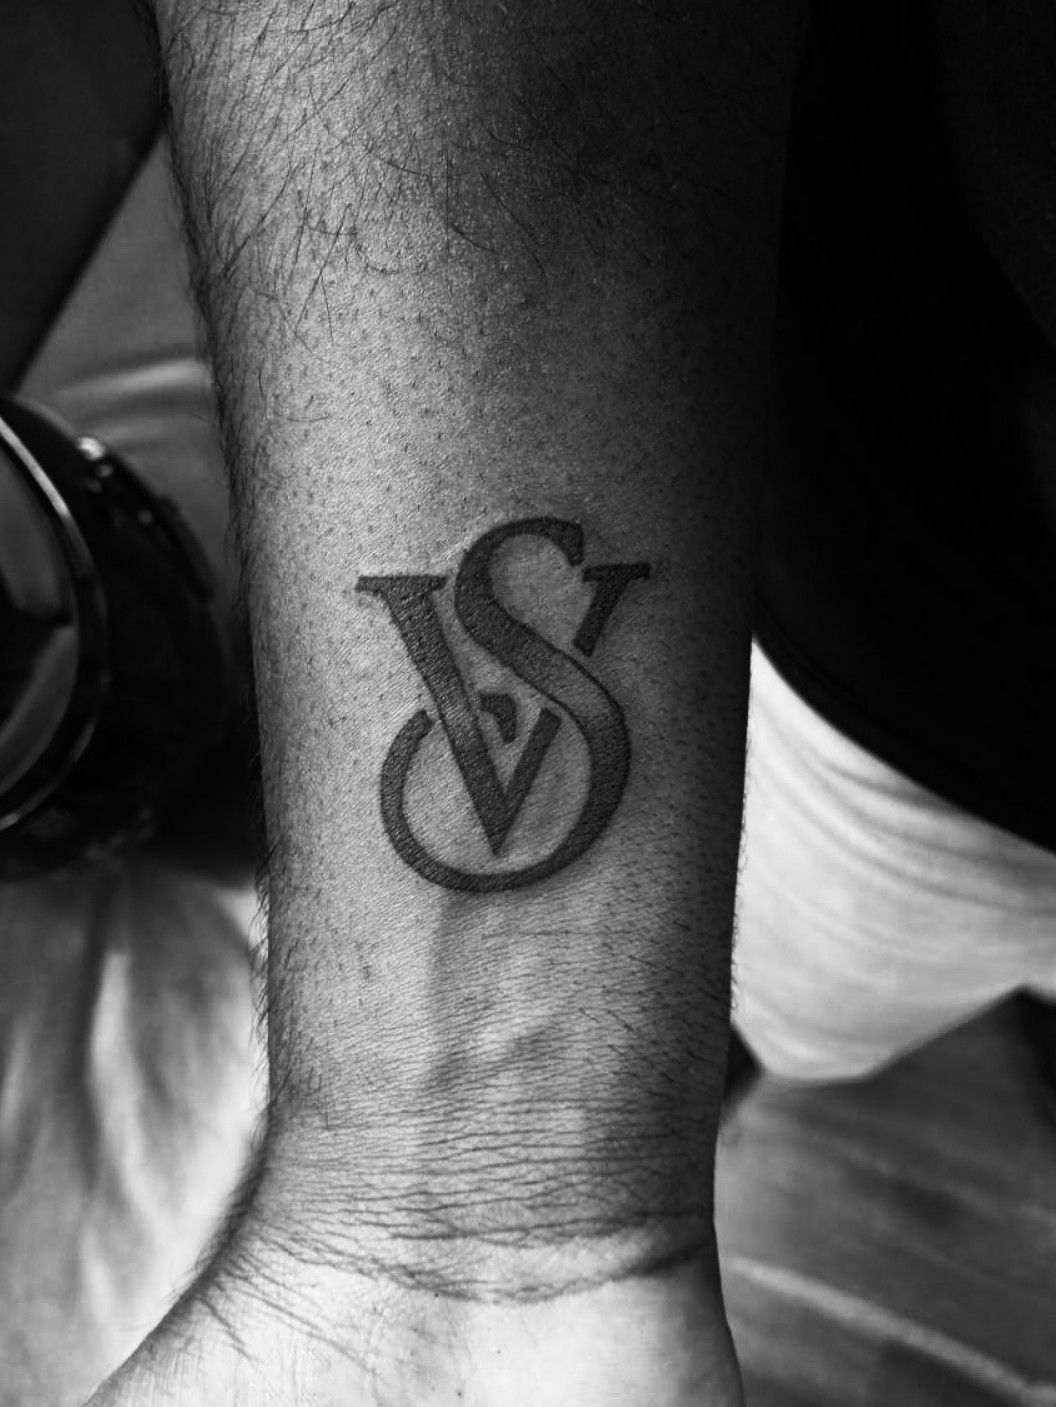 SV heartigram Union This heart tattoo was created with a single line  that designes the letters SV  Tattoo lettering Union tattoo Tattoo  designs and meanings